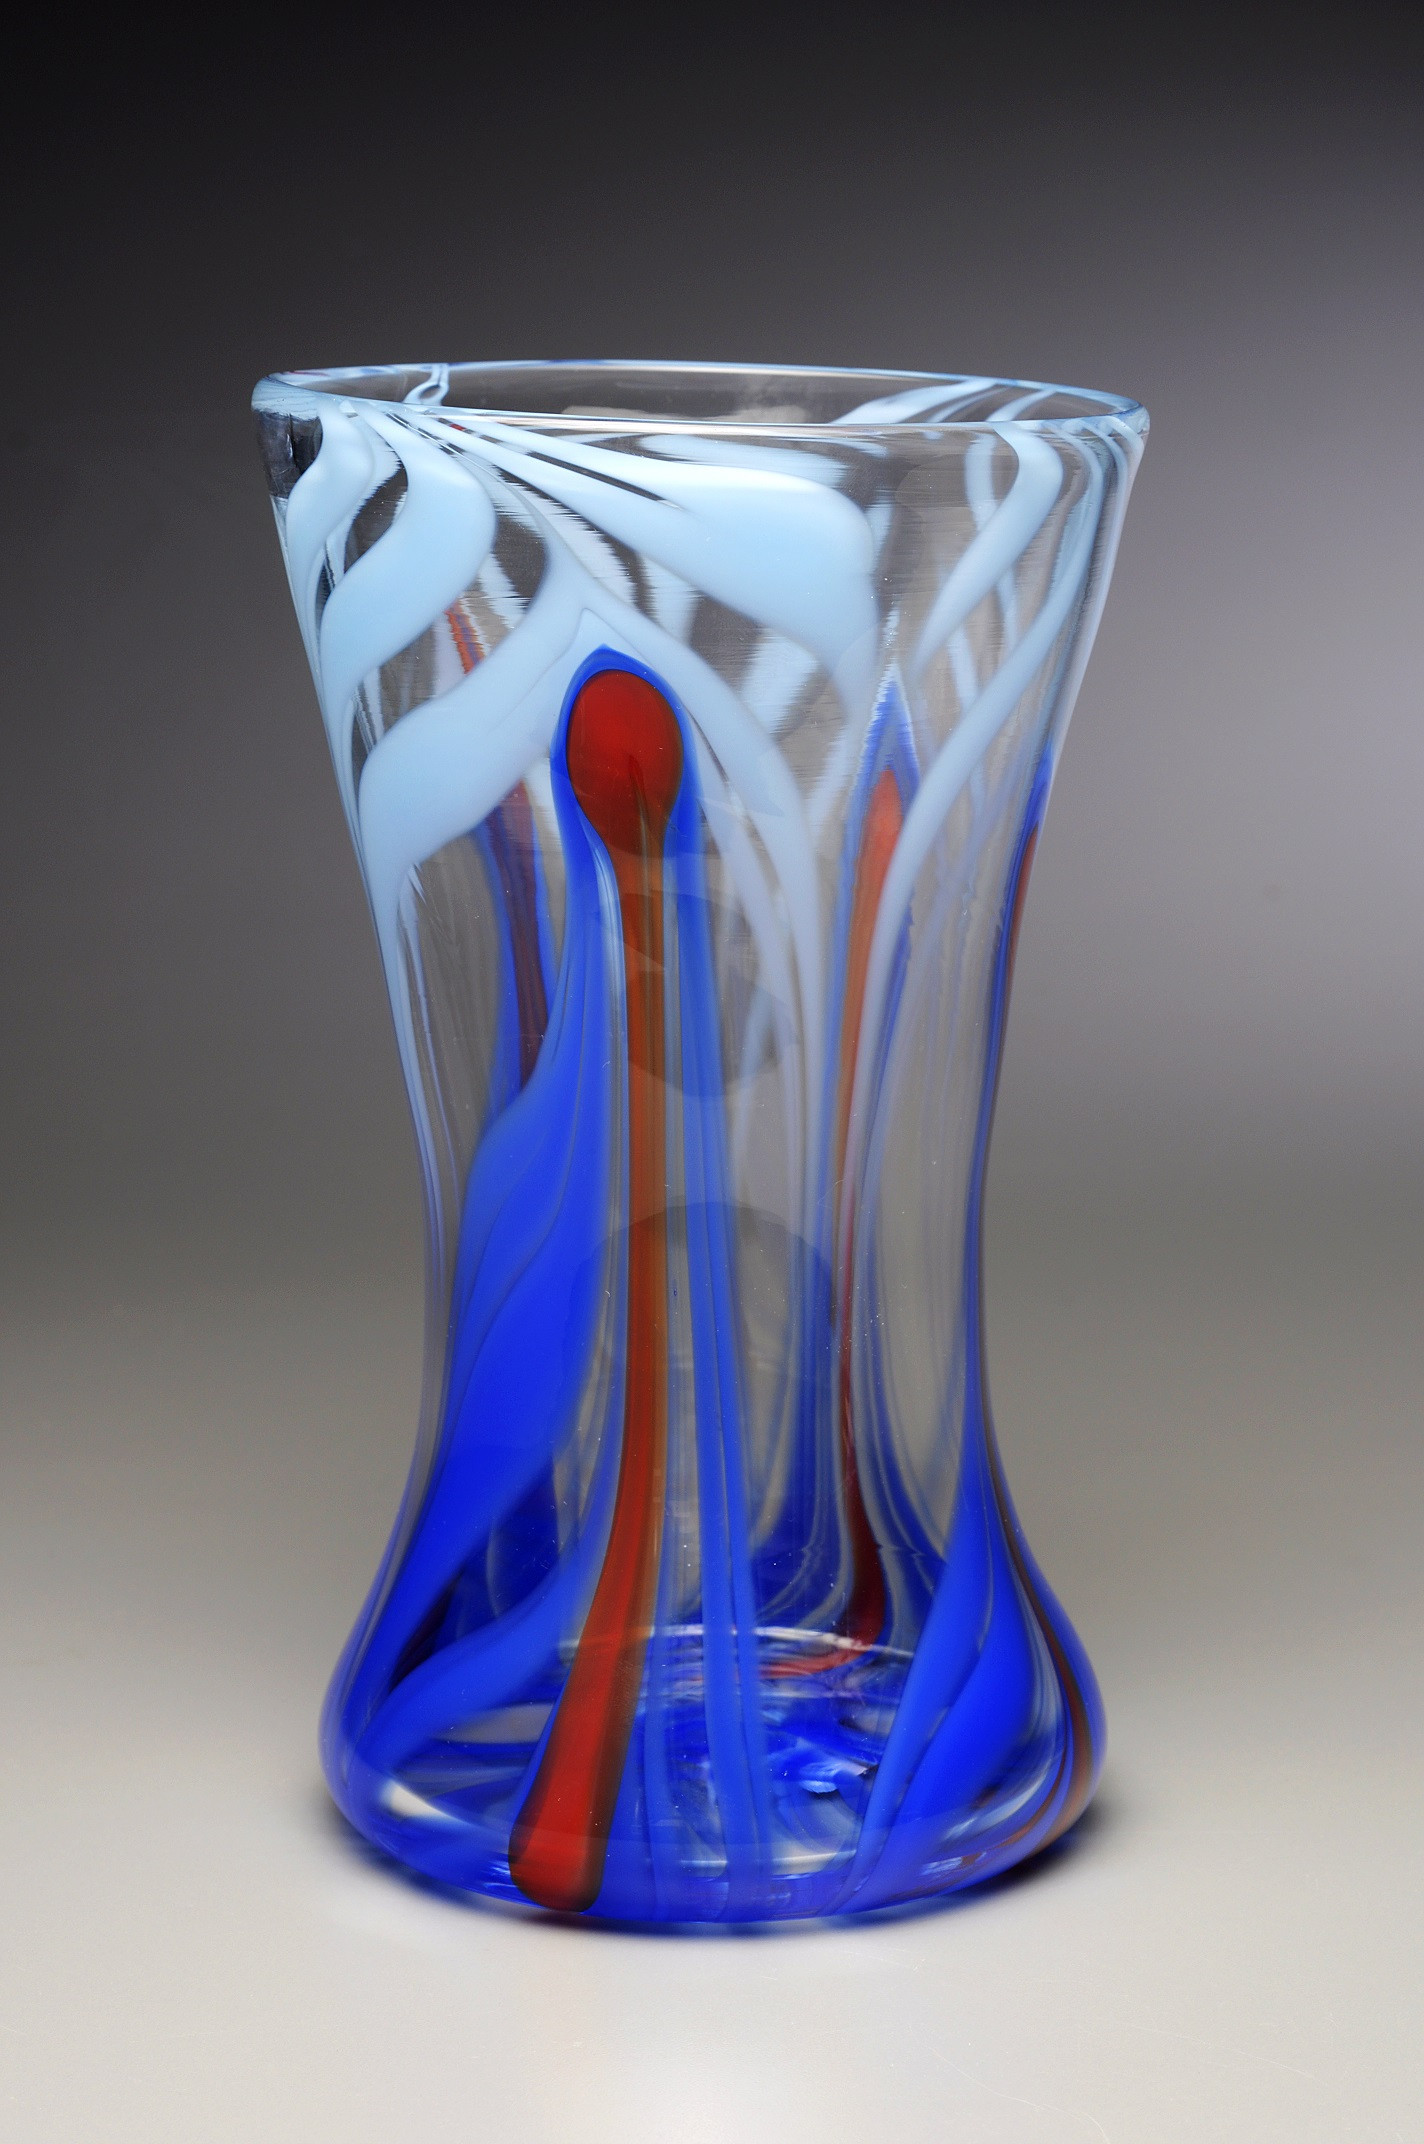 29 Spectacular 3.5 X 6 Cylinder Vase 2024 free download 3 5 x 6 cylinder vase of cac submissions creative arts workshop intended for flared vase glass 7e280b3 x 7e280b3